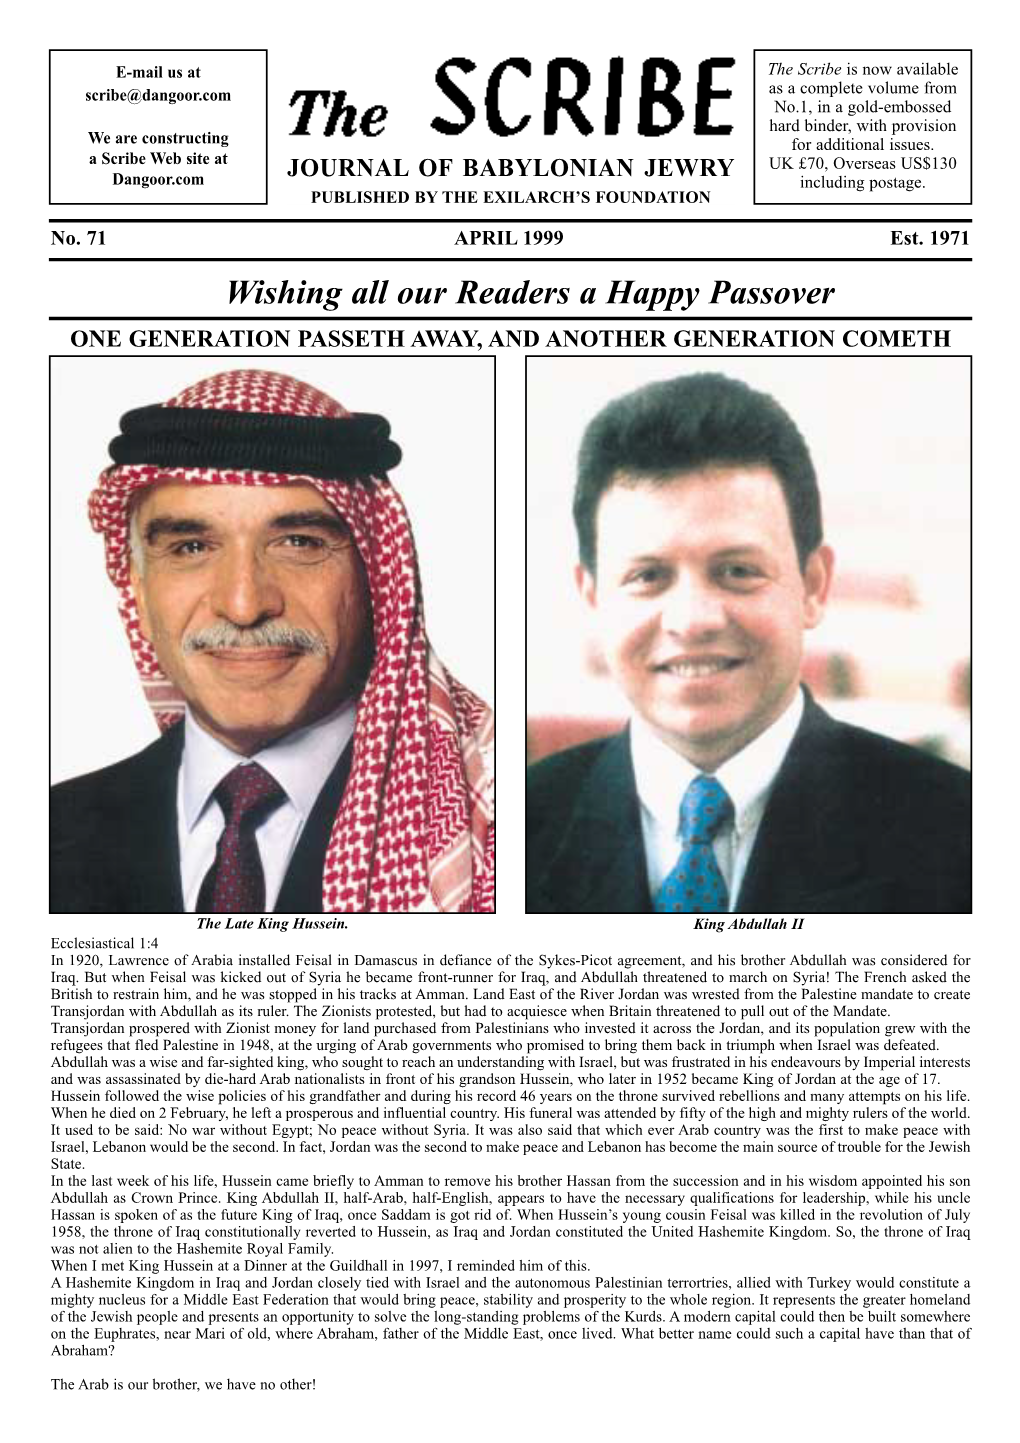 5 Wishing All Our Readers a Happy Passover